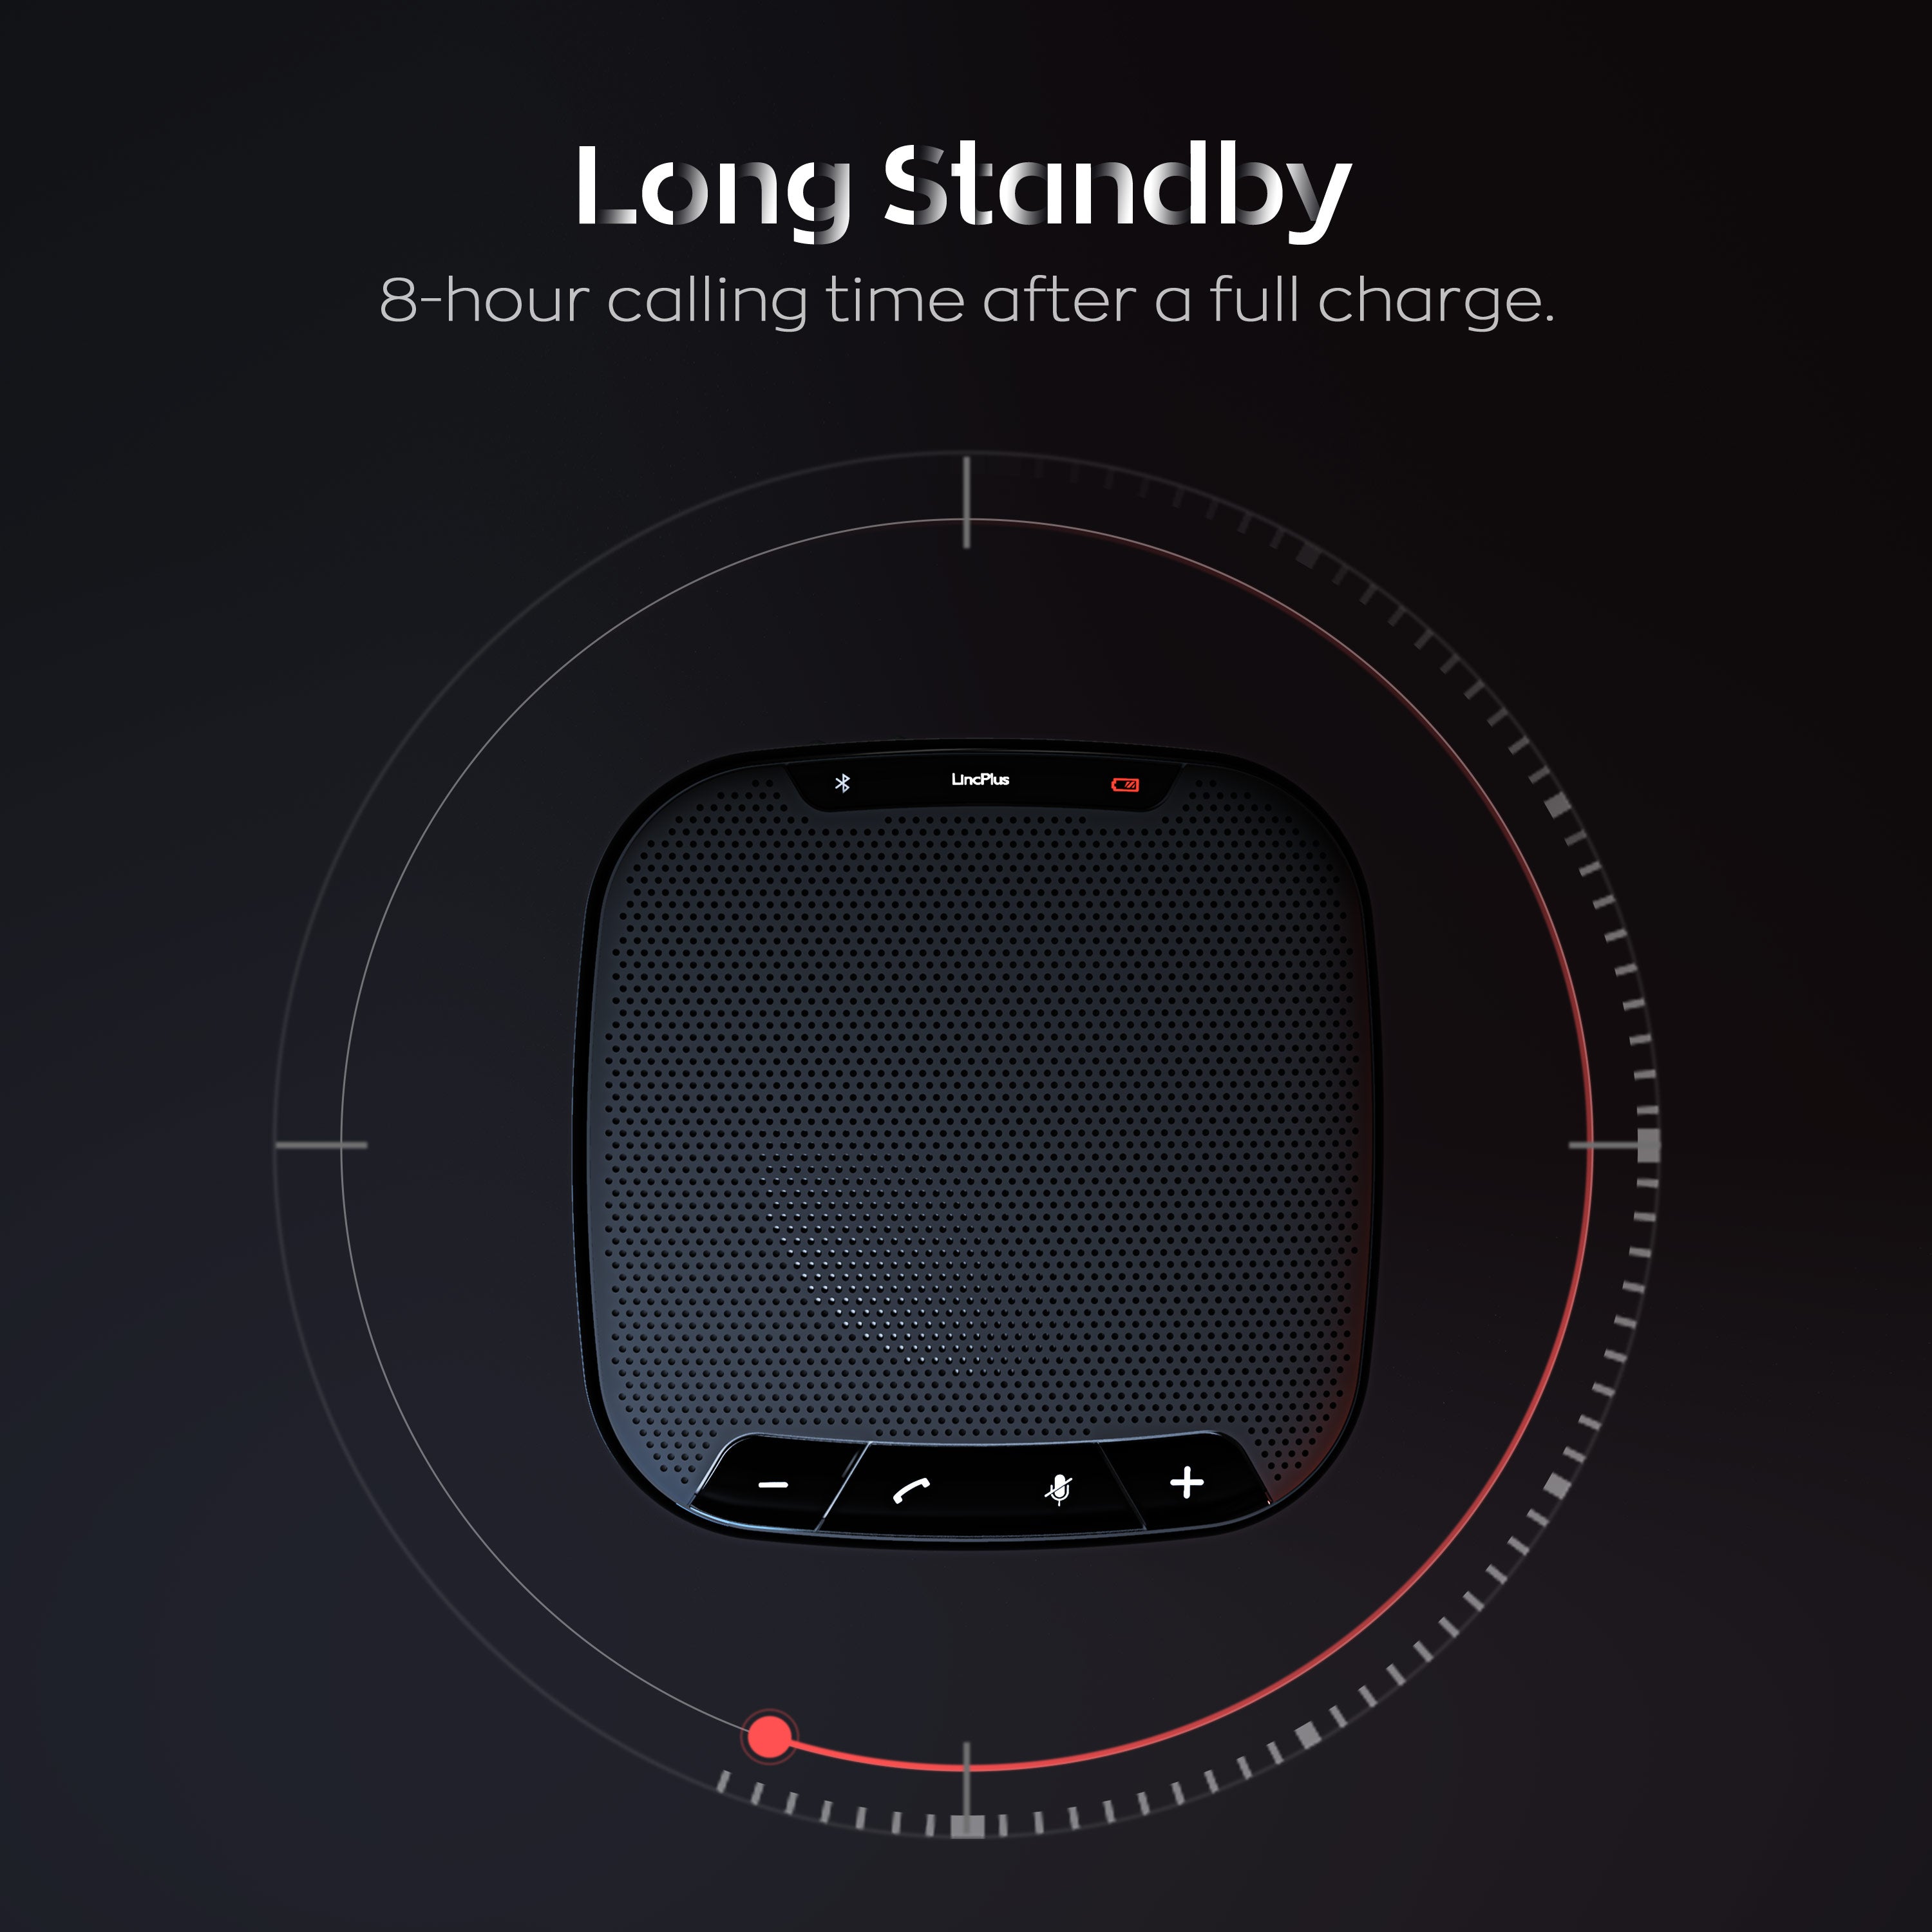 speakerphone with long standby - 8-hour calling time agter full charge